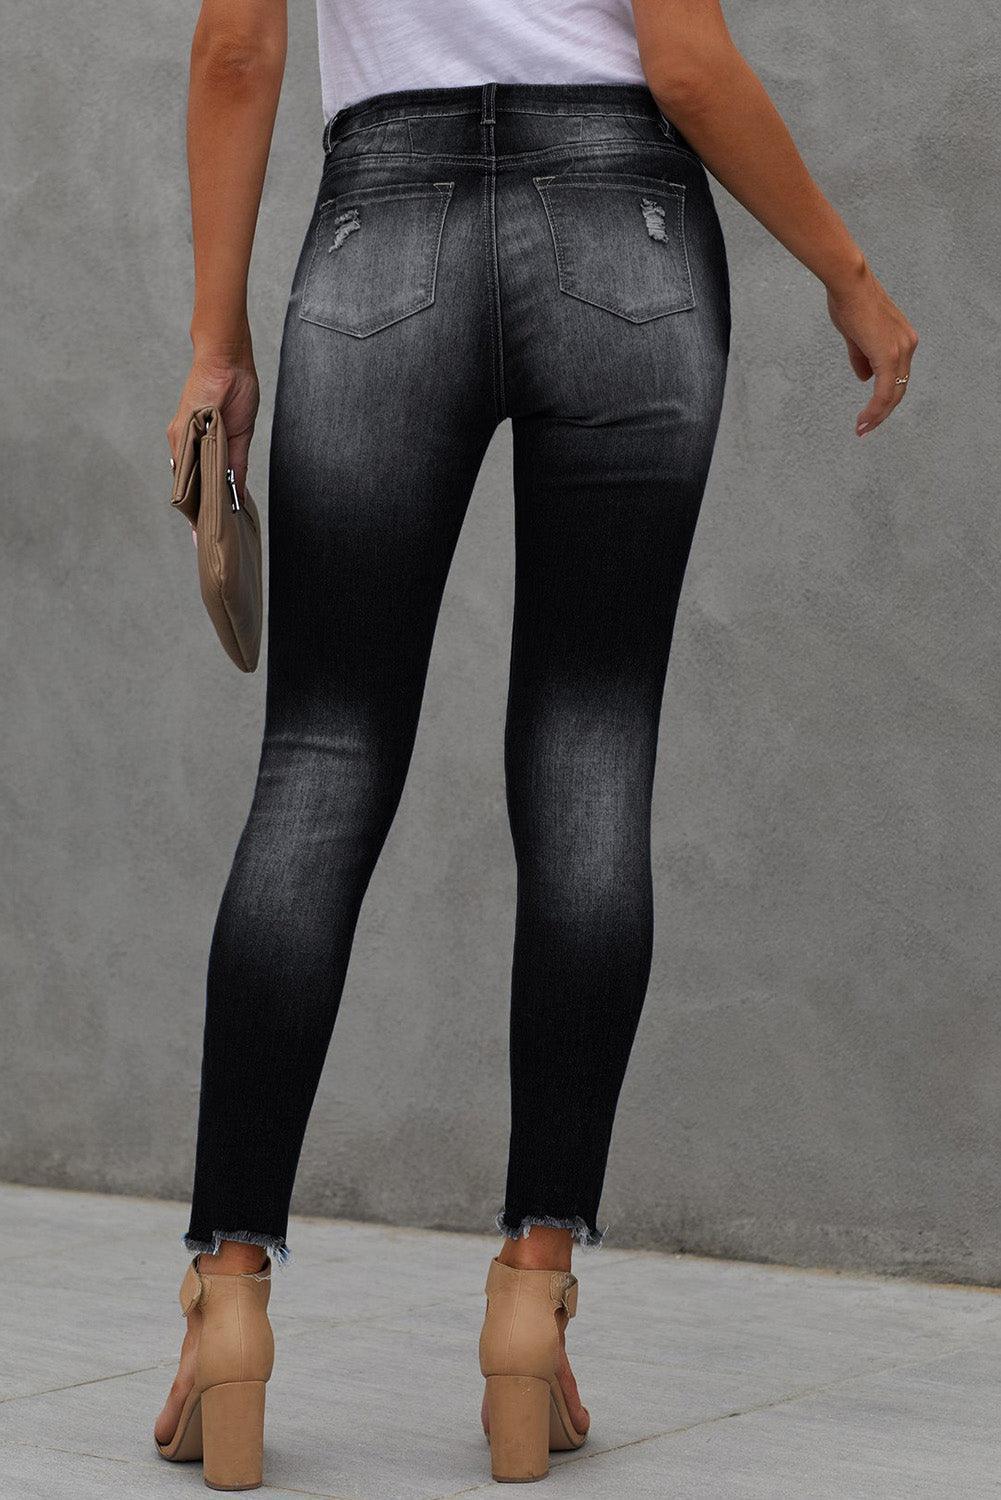 Weekend Style Button Fly High Waist Skinny Jeans - MXSTUDIO.COM